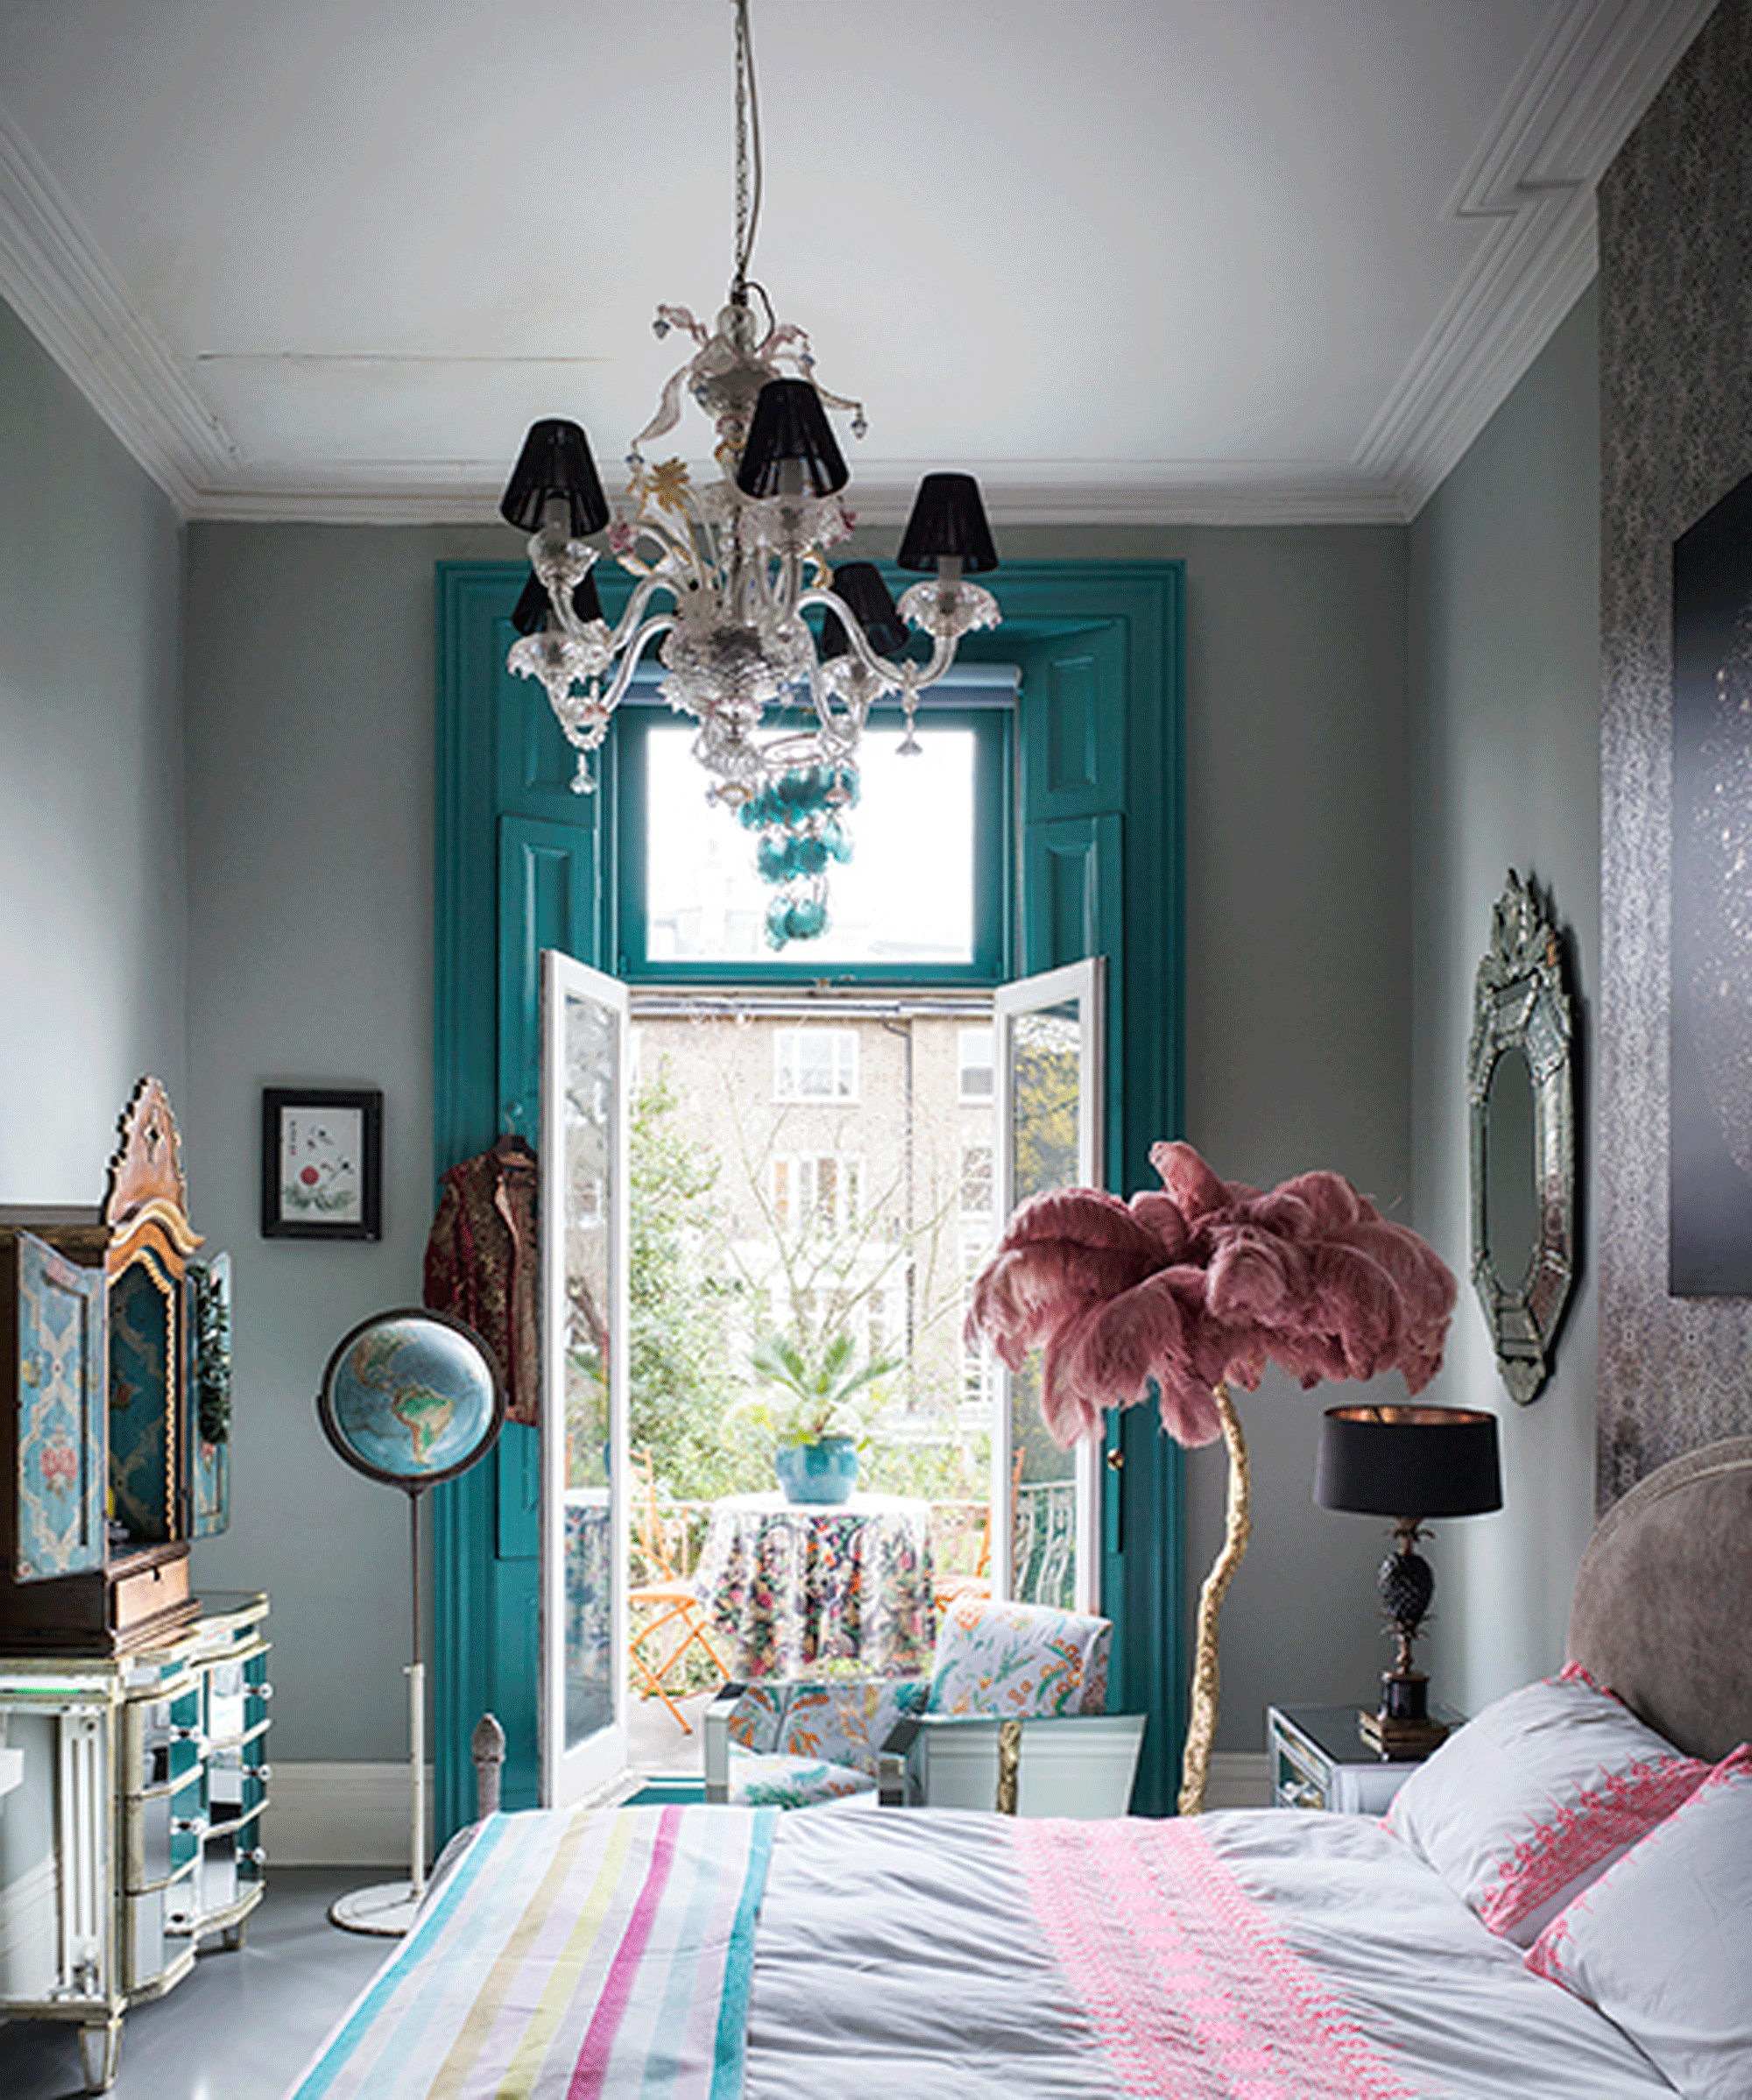 Maximalist bedroom with teal door and window frames leading to a balcony